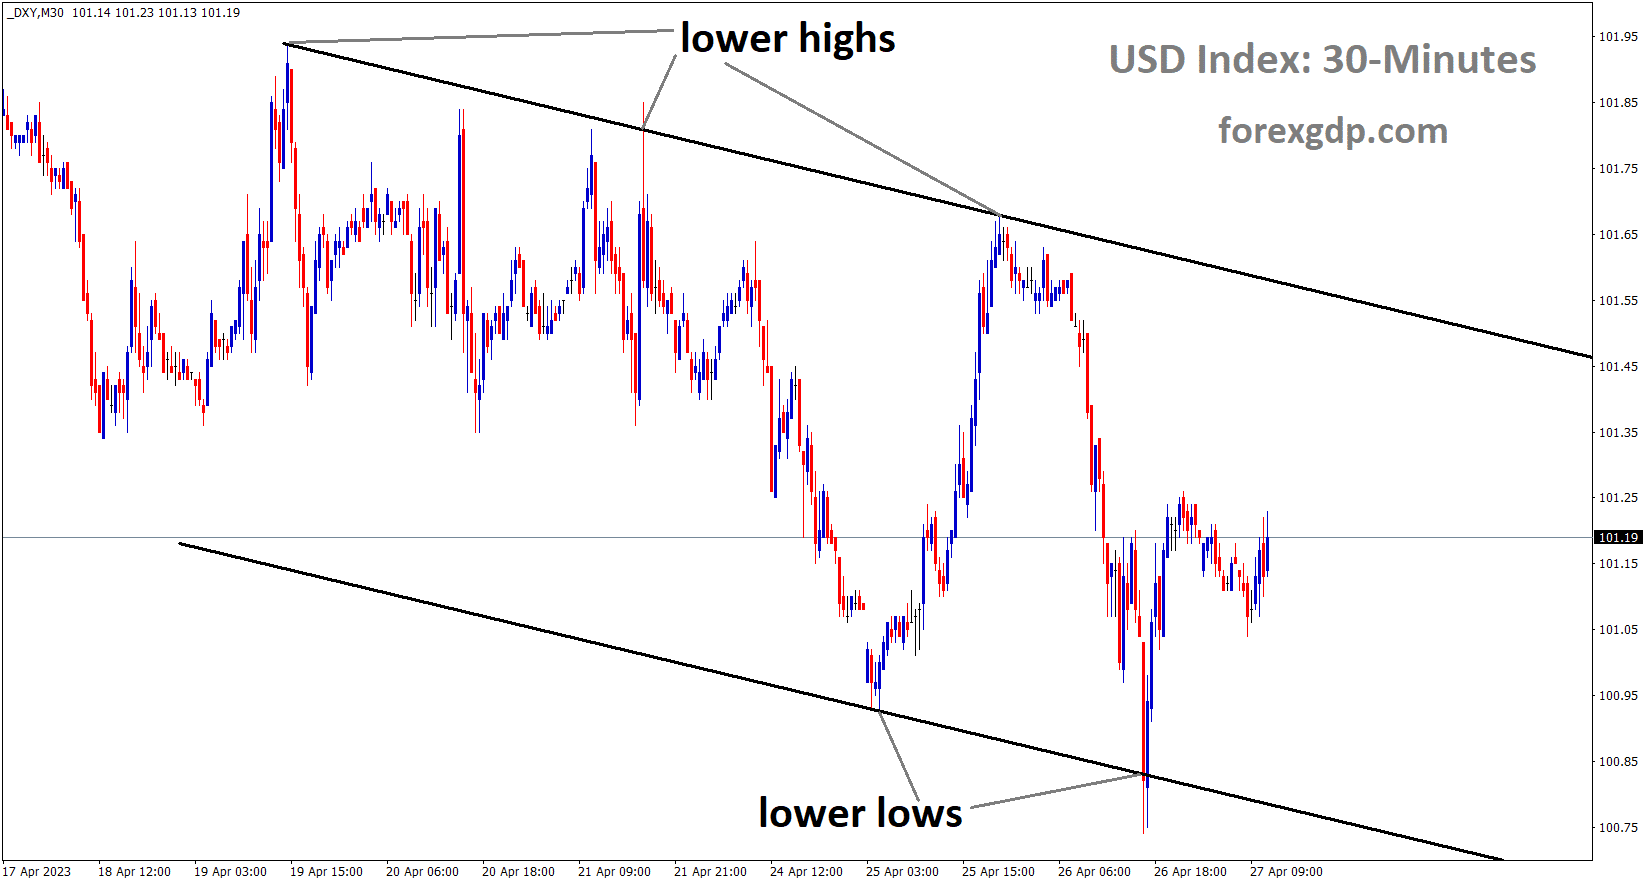 DXY Index is moving in the Descending channel and the market has rebounded from the lower low area of the channel